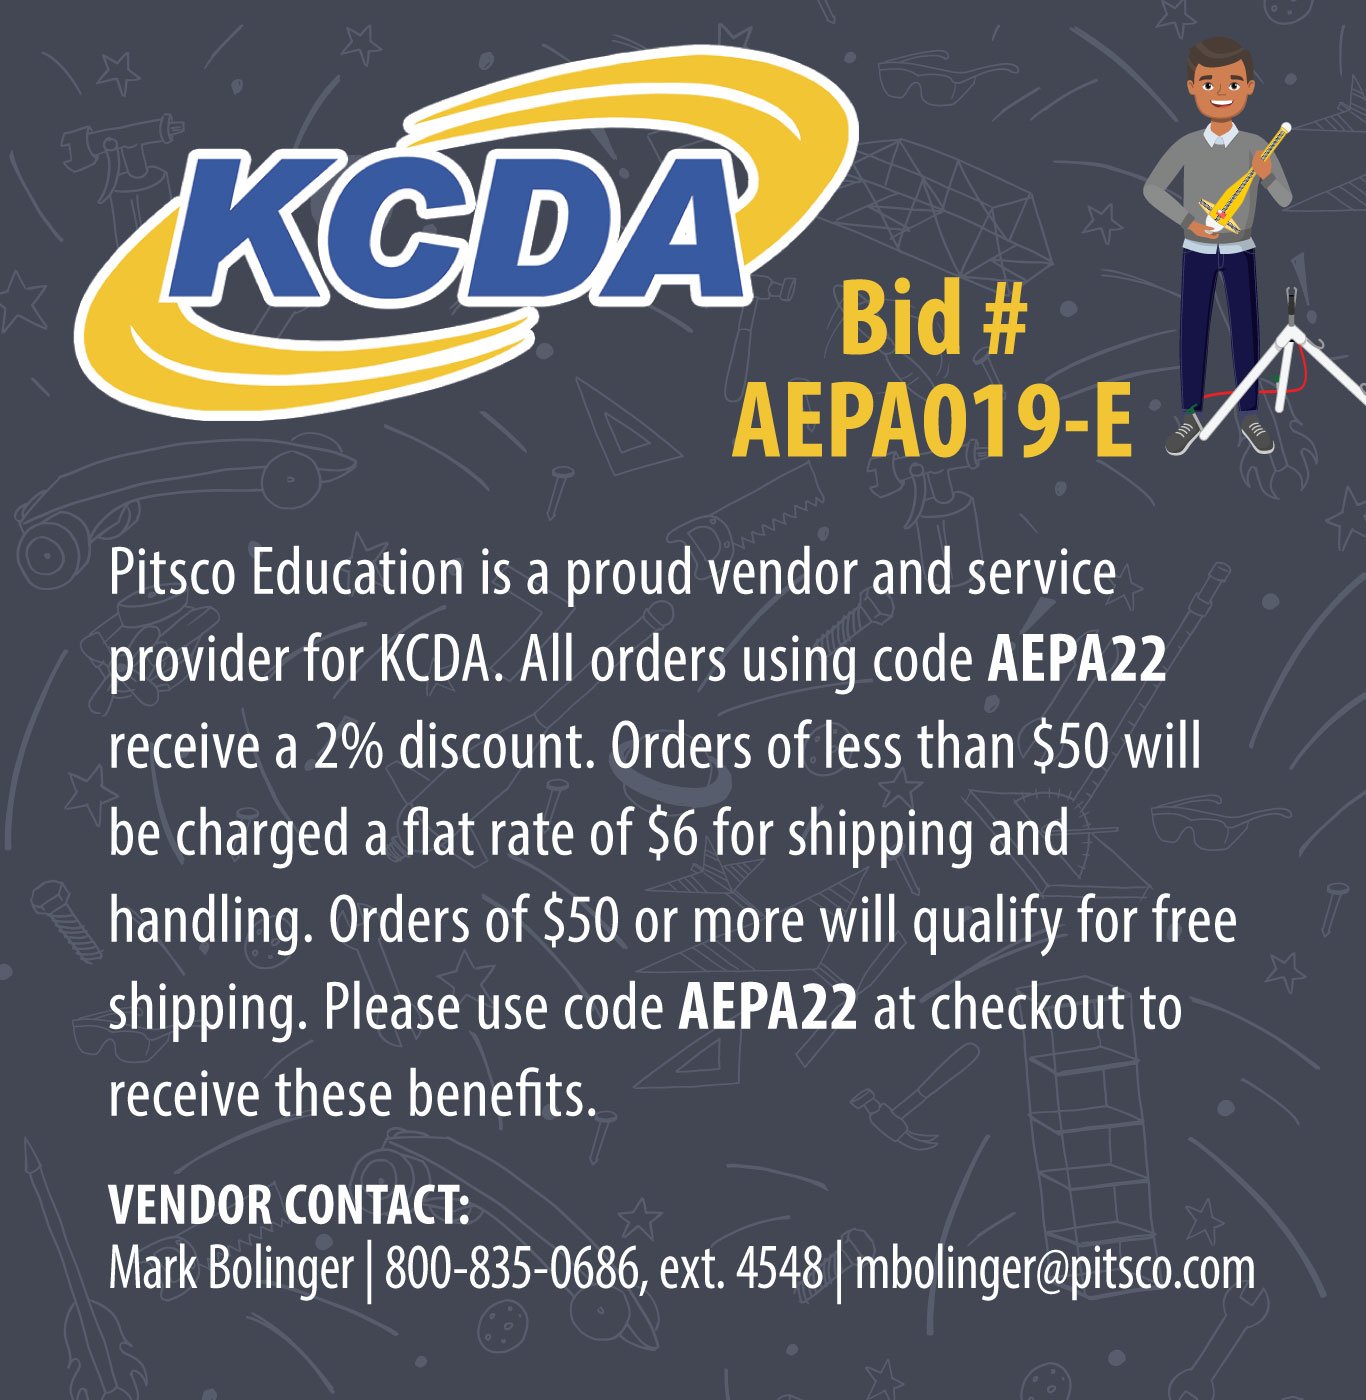 KCDA Bid # AEPA019-E – Pitsco Education is a proud vendor and service provider for KCDA. Orders under $50 will not qualify for free shipping and will be charged a flat rate of $6.00 for shipping and handling. Orders of $50 to $99 will qualify for free shipping. Orders of $100 or more will qualify for free shippping and will receive a 2% discount on the order total. Please use promo code AEPA22 at checkout to receive these benefits. VENDOR CONTACT: Staci Goodson | 800-835-0686, ext. 4526 | sgoodson@pitsco.com